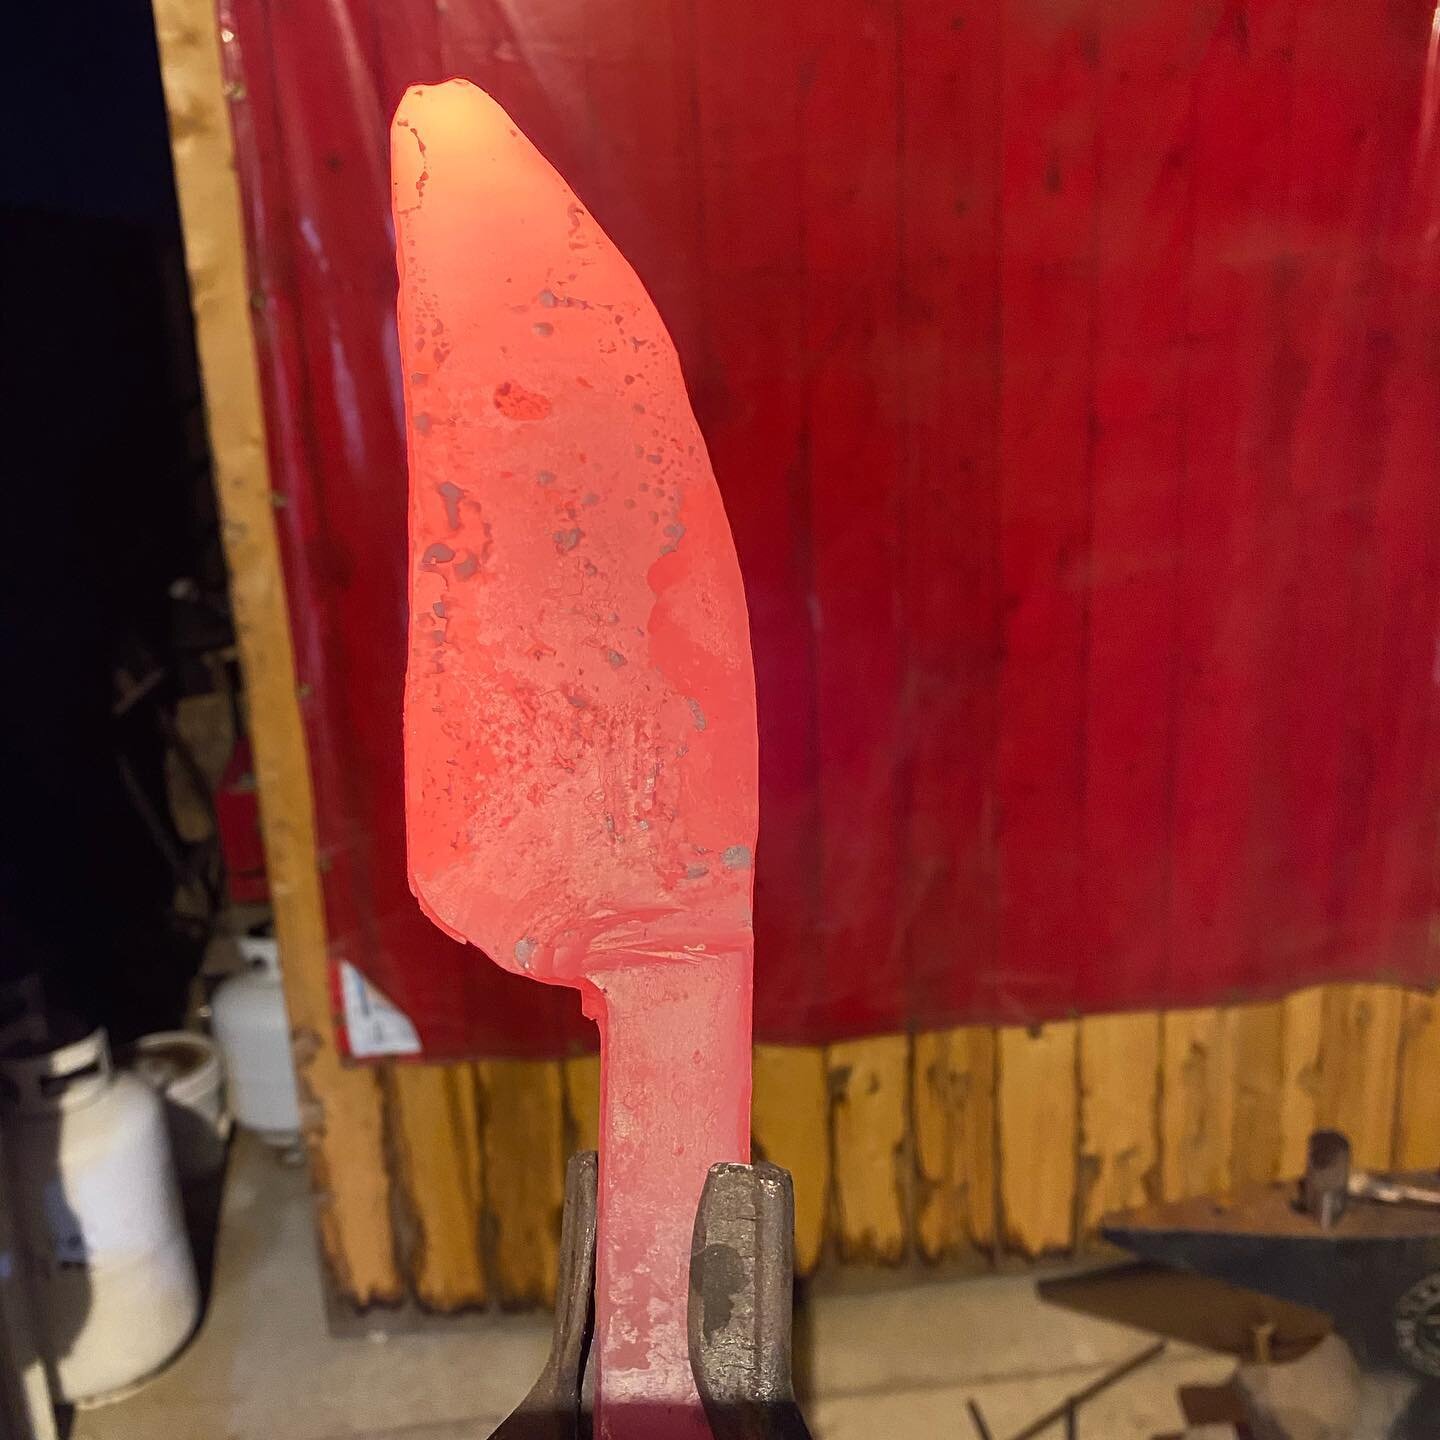 My 2nd attempt at an integral knife. Went with a kitchen chopper for this one😀 #knife #forge #kitchen #chef #santoku #handmade #create #handcrafted #americanbladesmithsociety #hammer #grind #steel